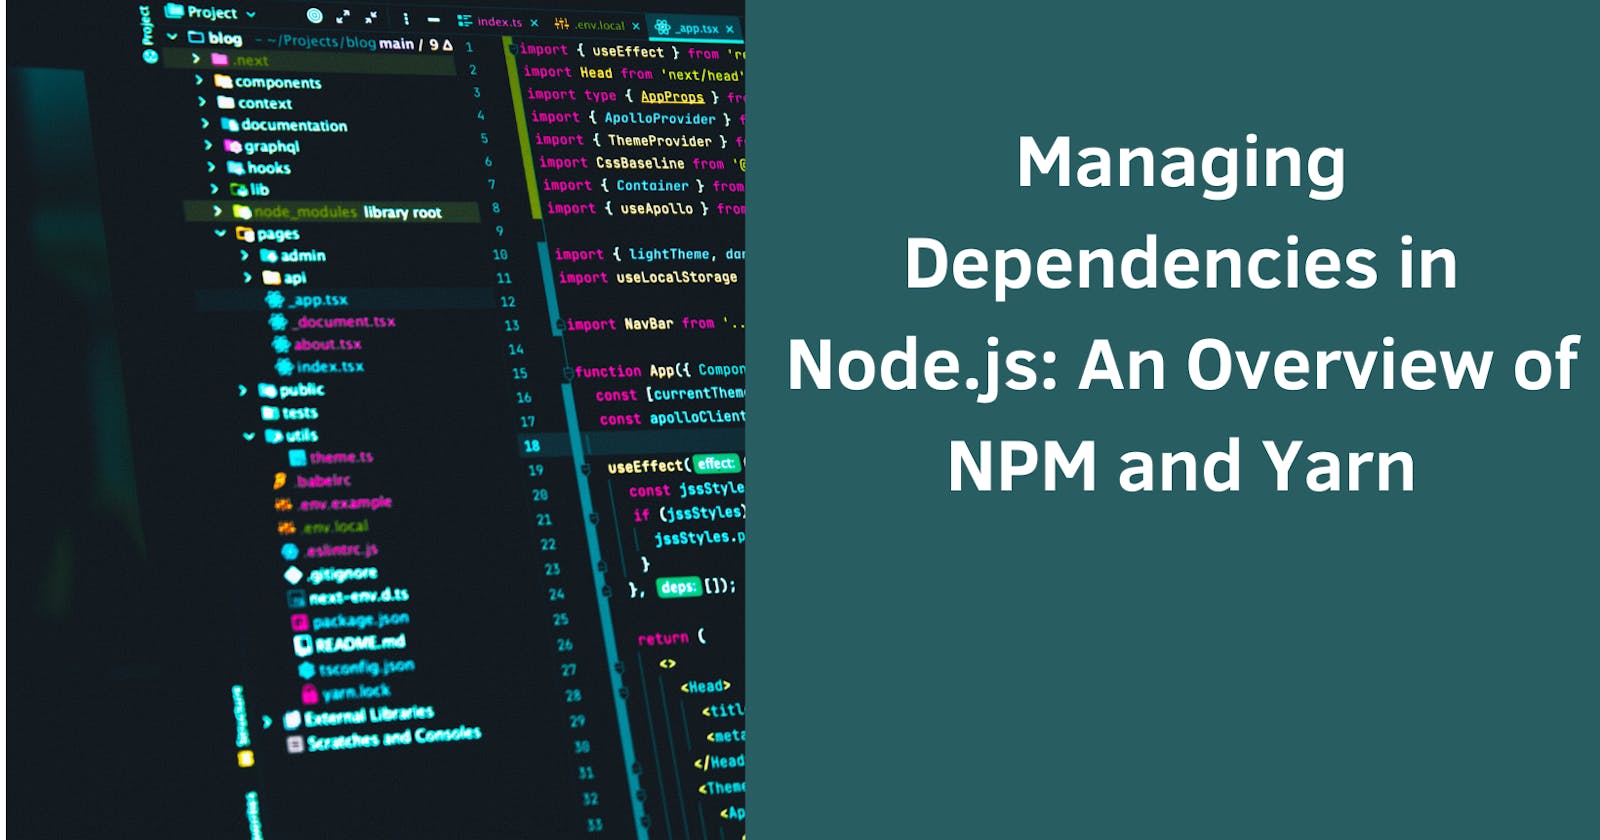 Managing Dependencies in Node.js: An Overview of NPM and Yarn